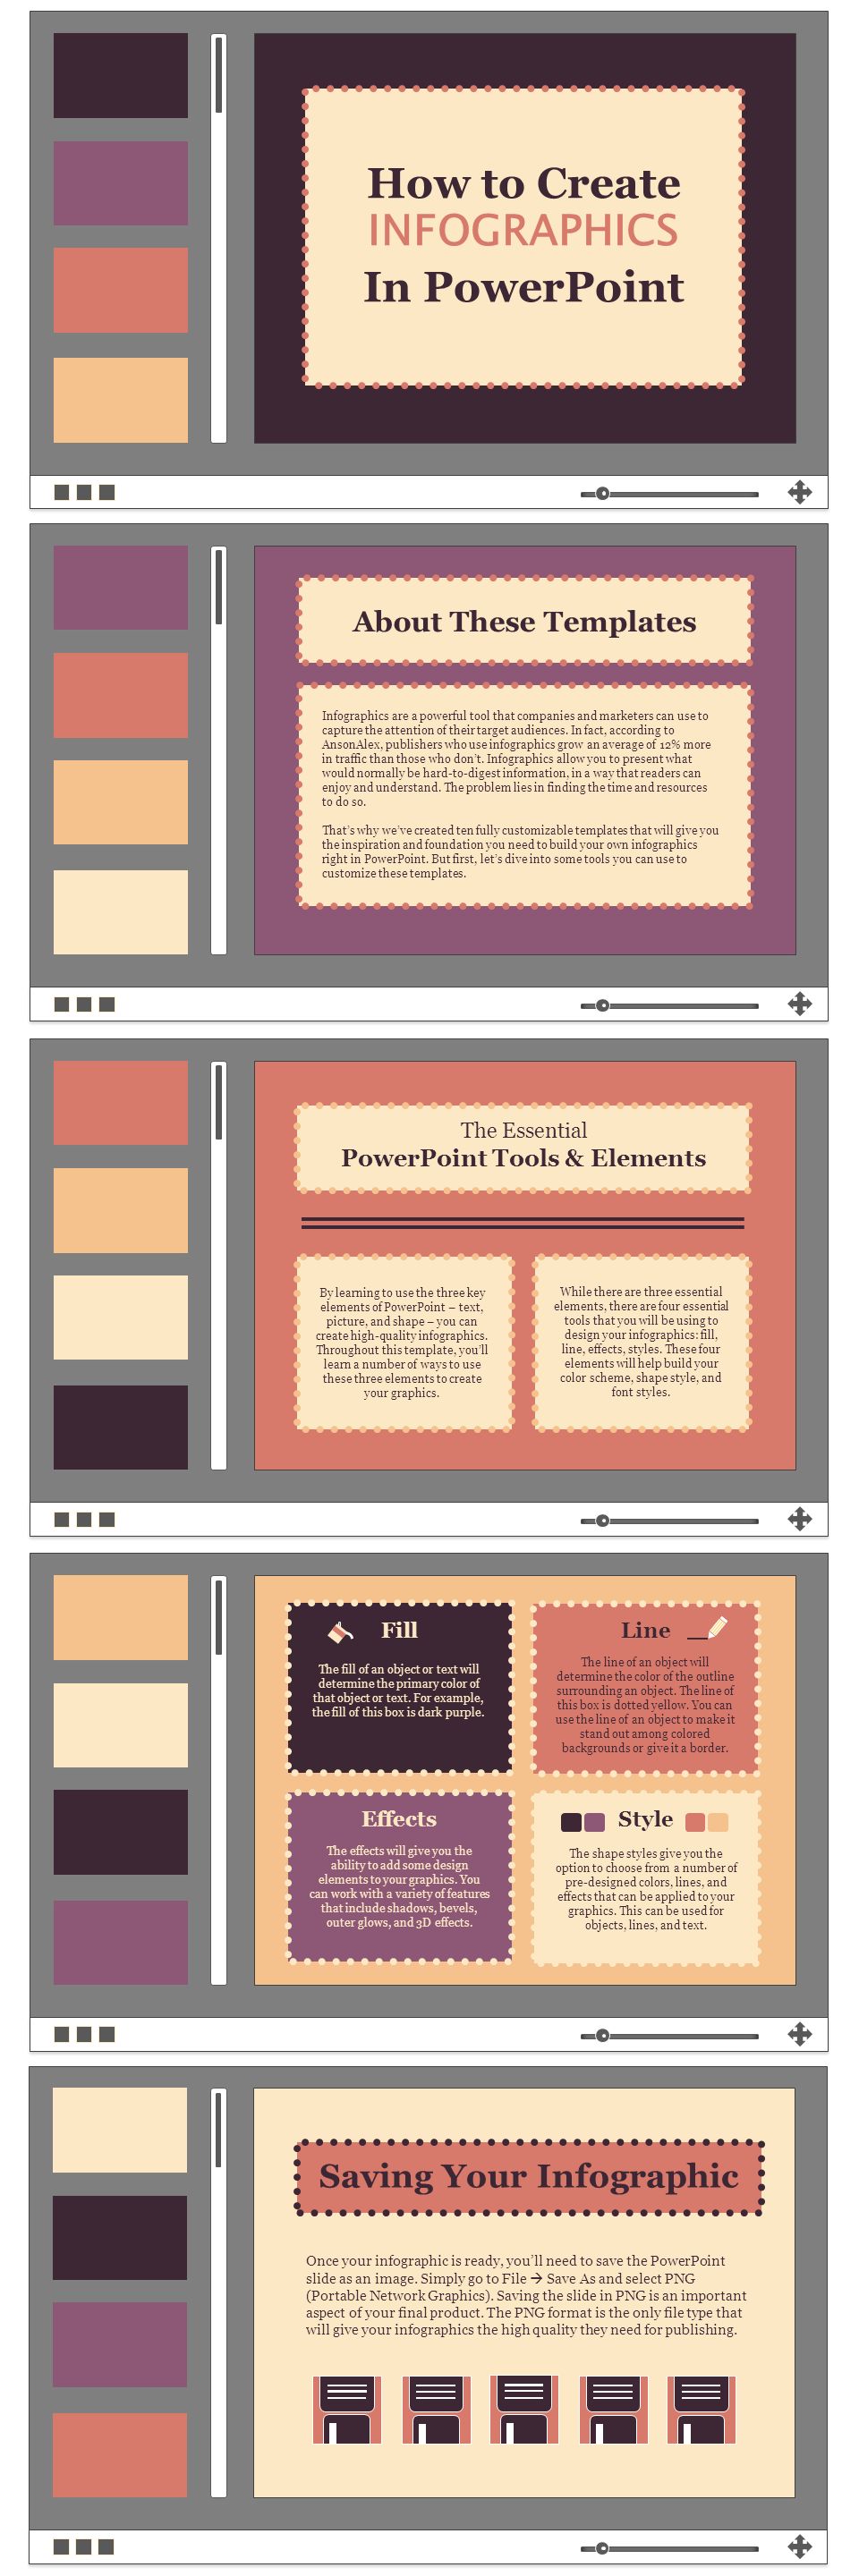 By learning to use the three key elements of PowerPoint – text